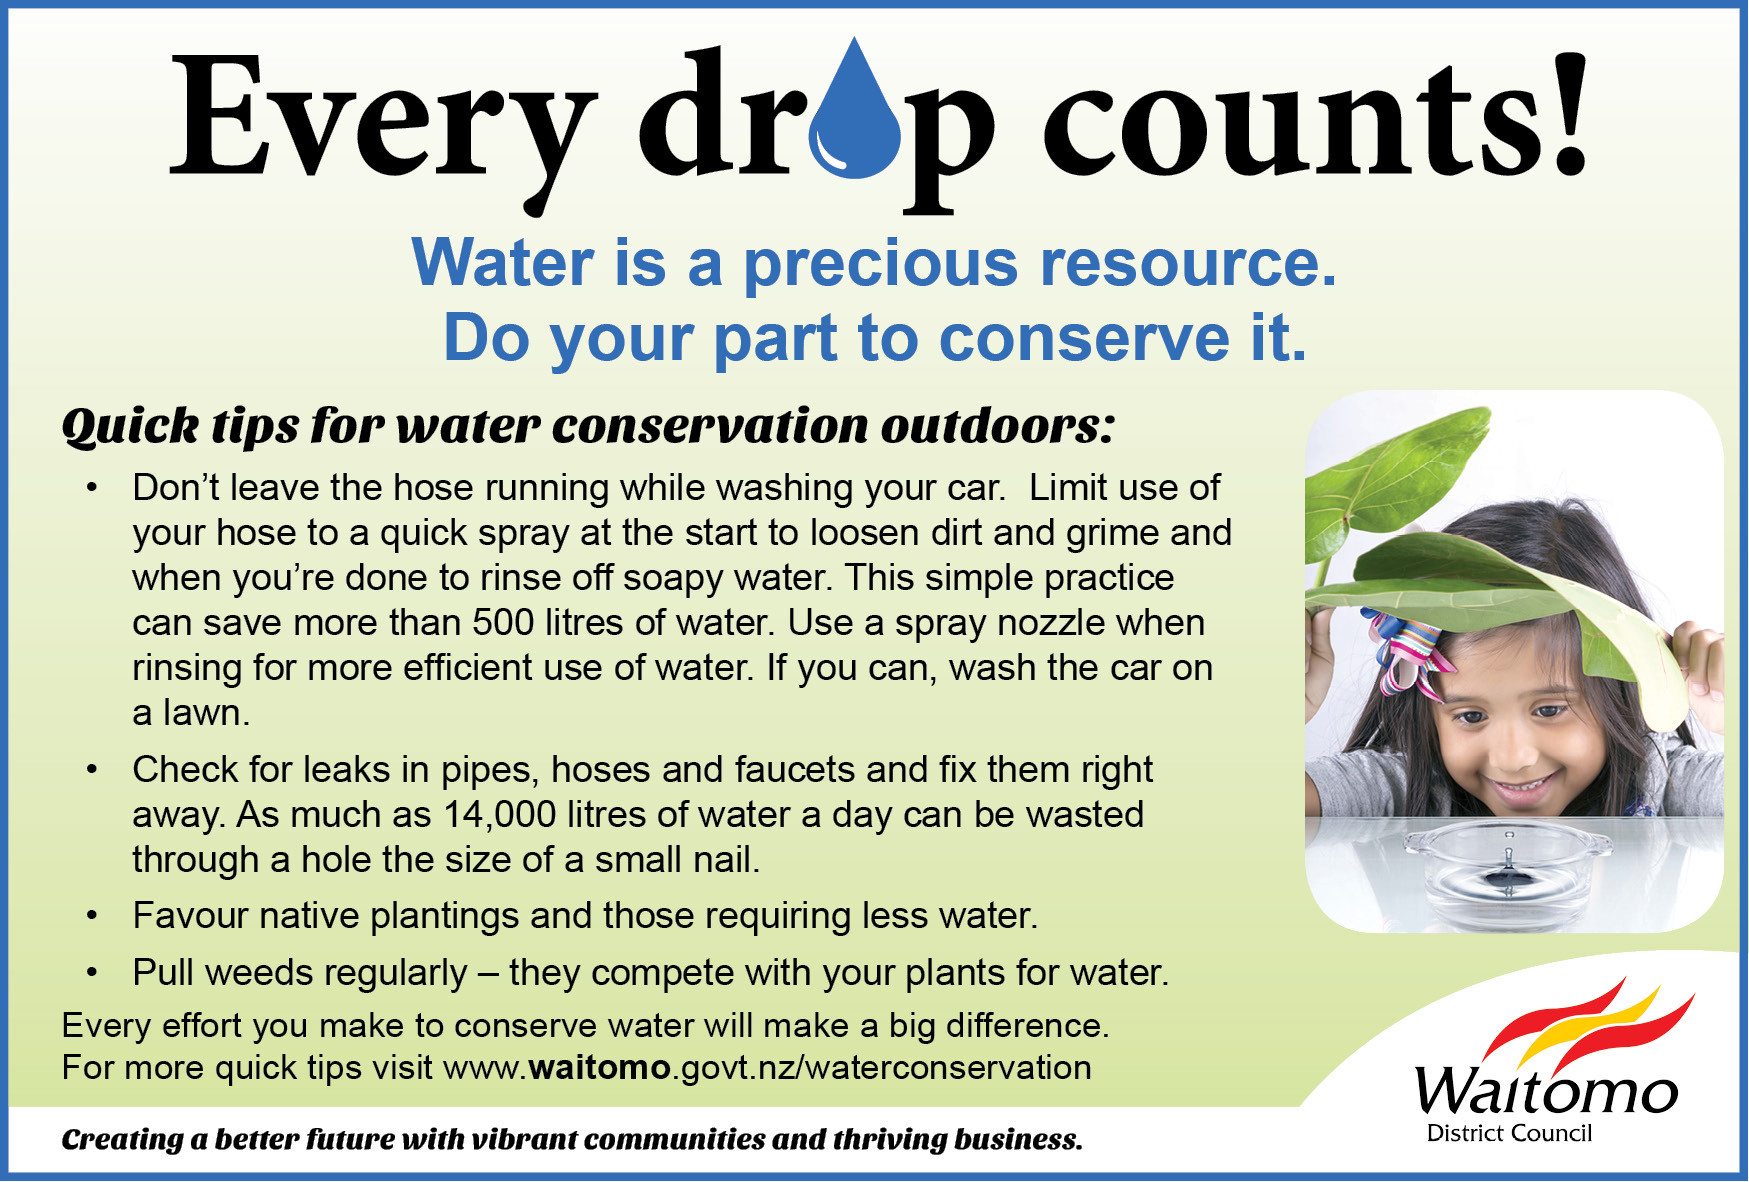 Every drop counts! Quick tips for water conservation outdoors